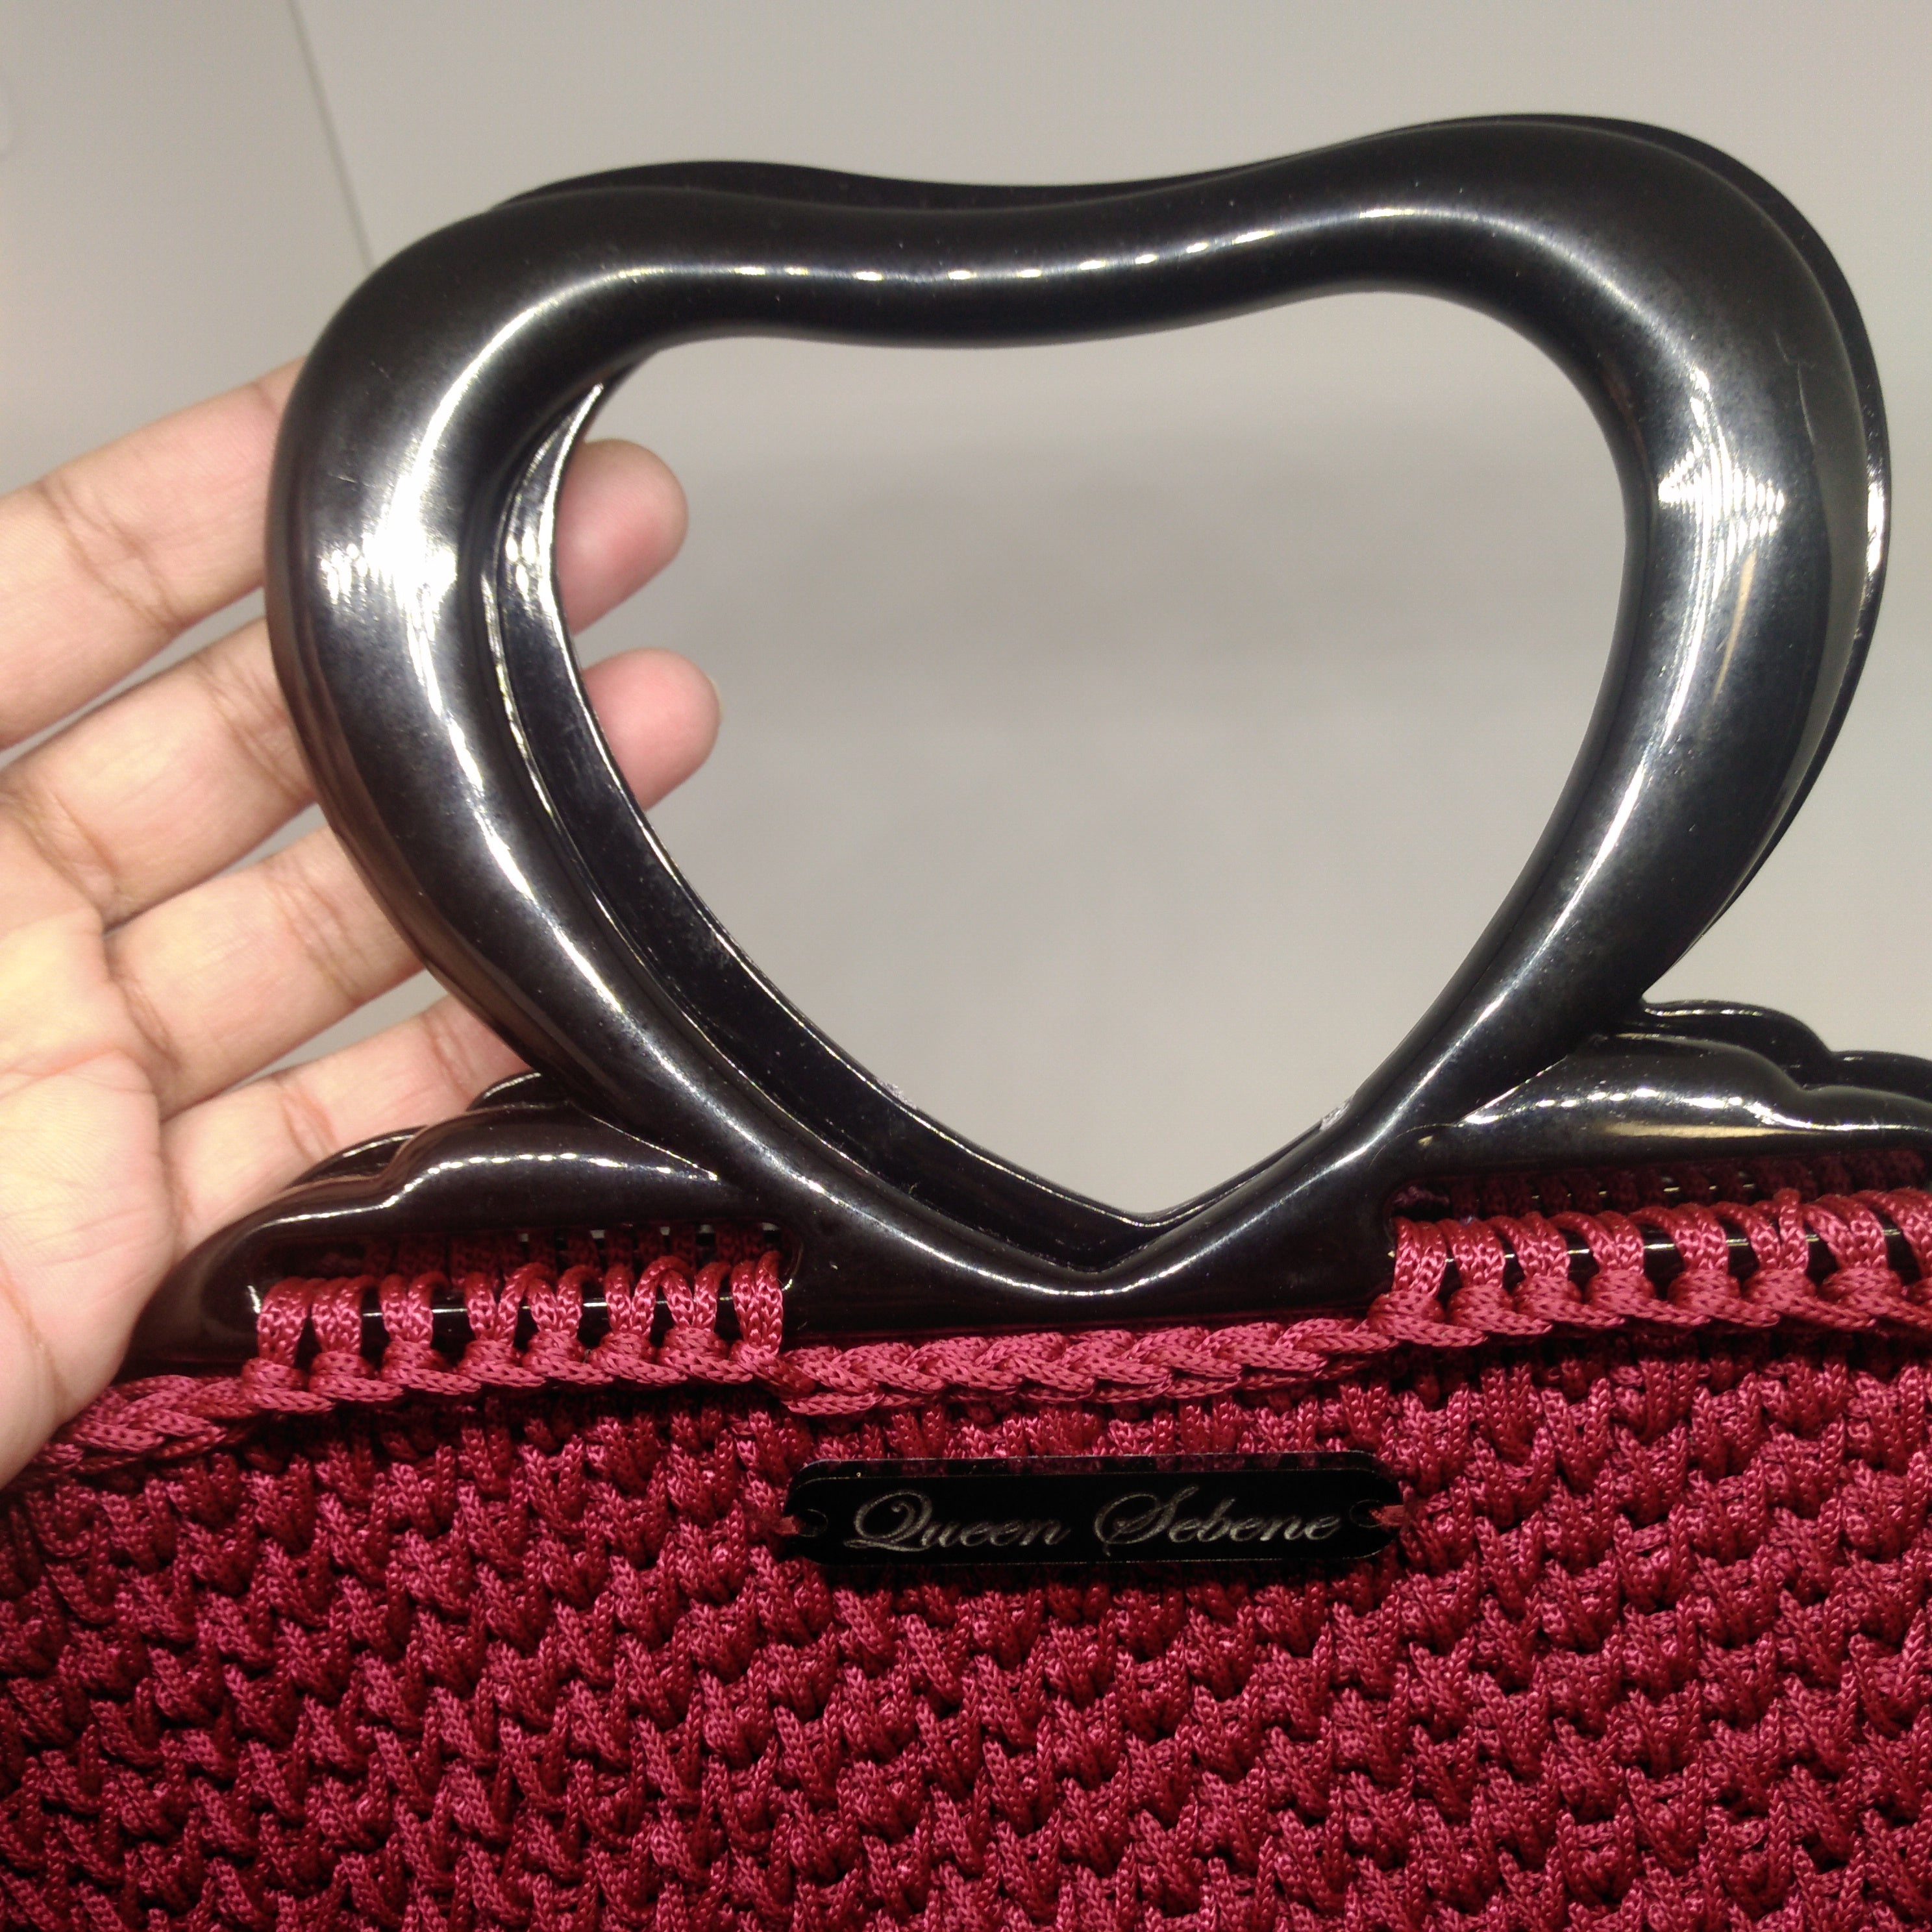 close up view of the handle of  Burgundy crochet handbag with black heart shaped acrylic handle